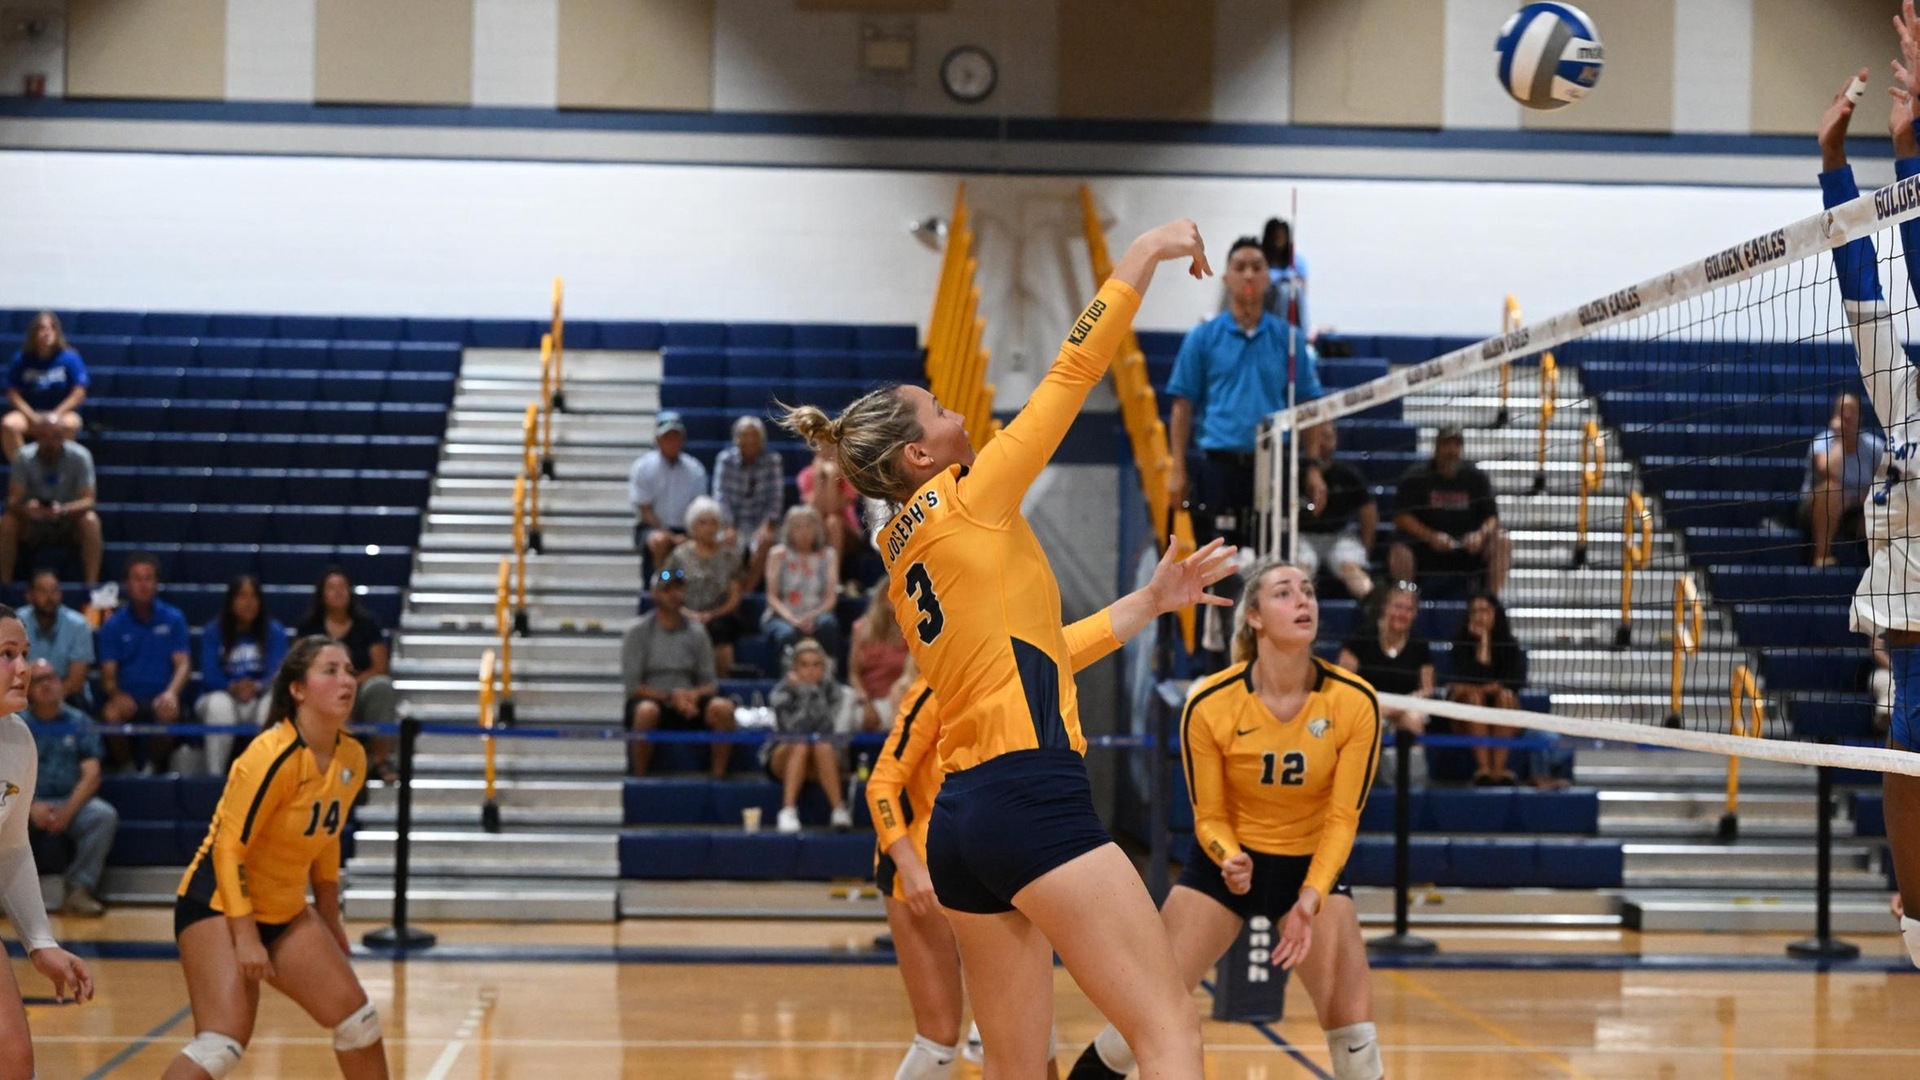 Women's Volleyball Sweeps Purchase, 3-0